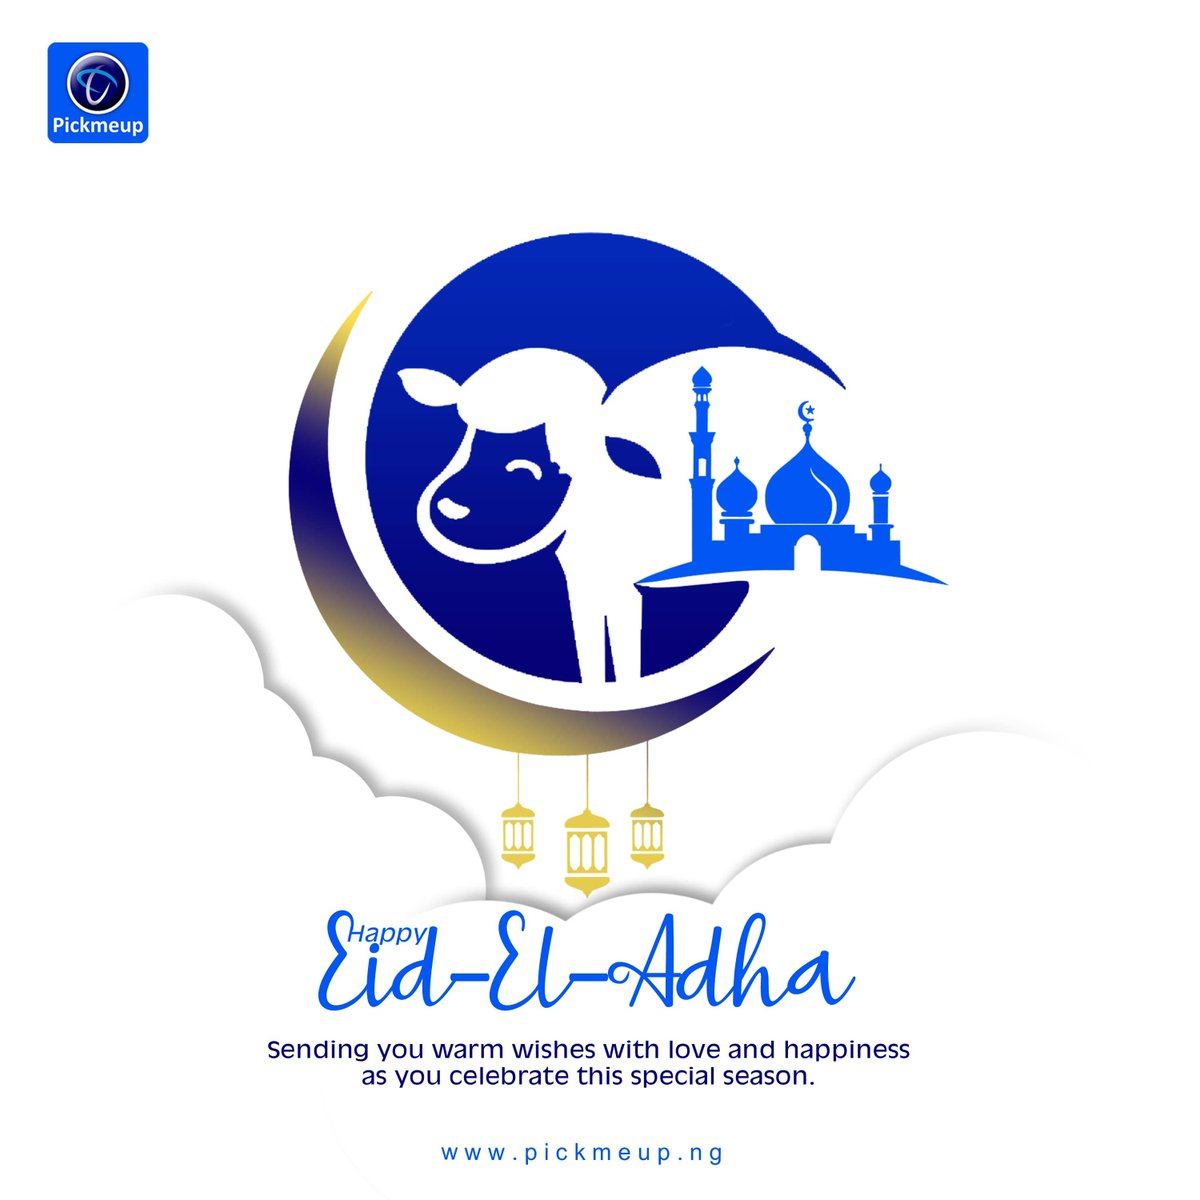 Happy Eid Al Adha from all of us @pickmeupng It's our prayer that the peace and blessings of the season be with you and yours, now and always. We wish you an outstanding celebration. For booking or further assistance visit pickmeup.ng #EidMubarak #eidaladha2022